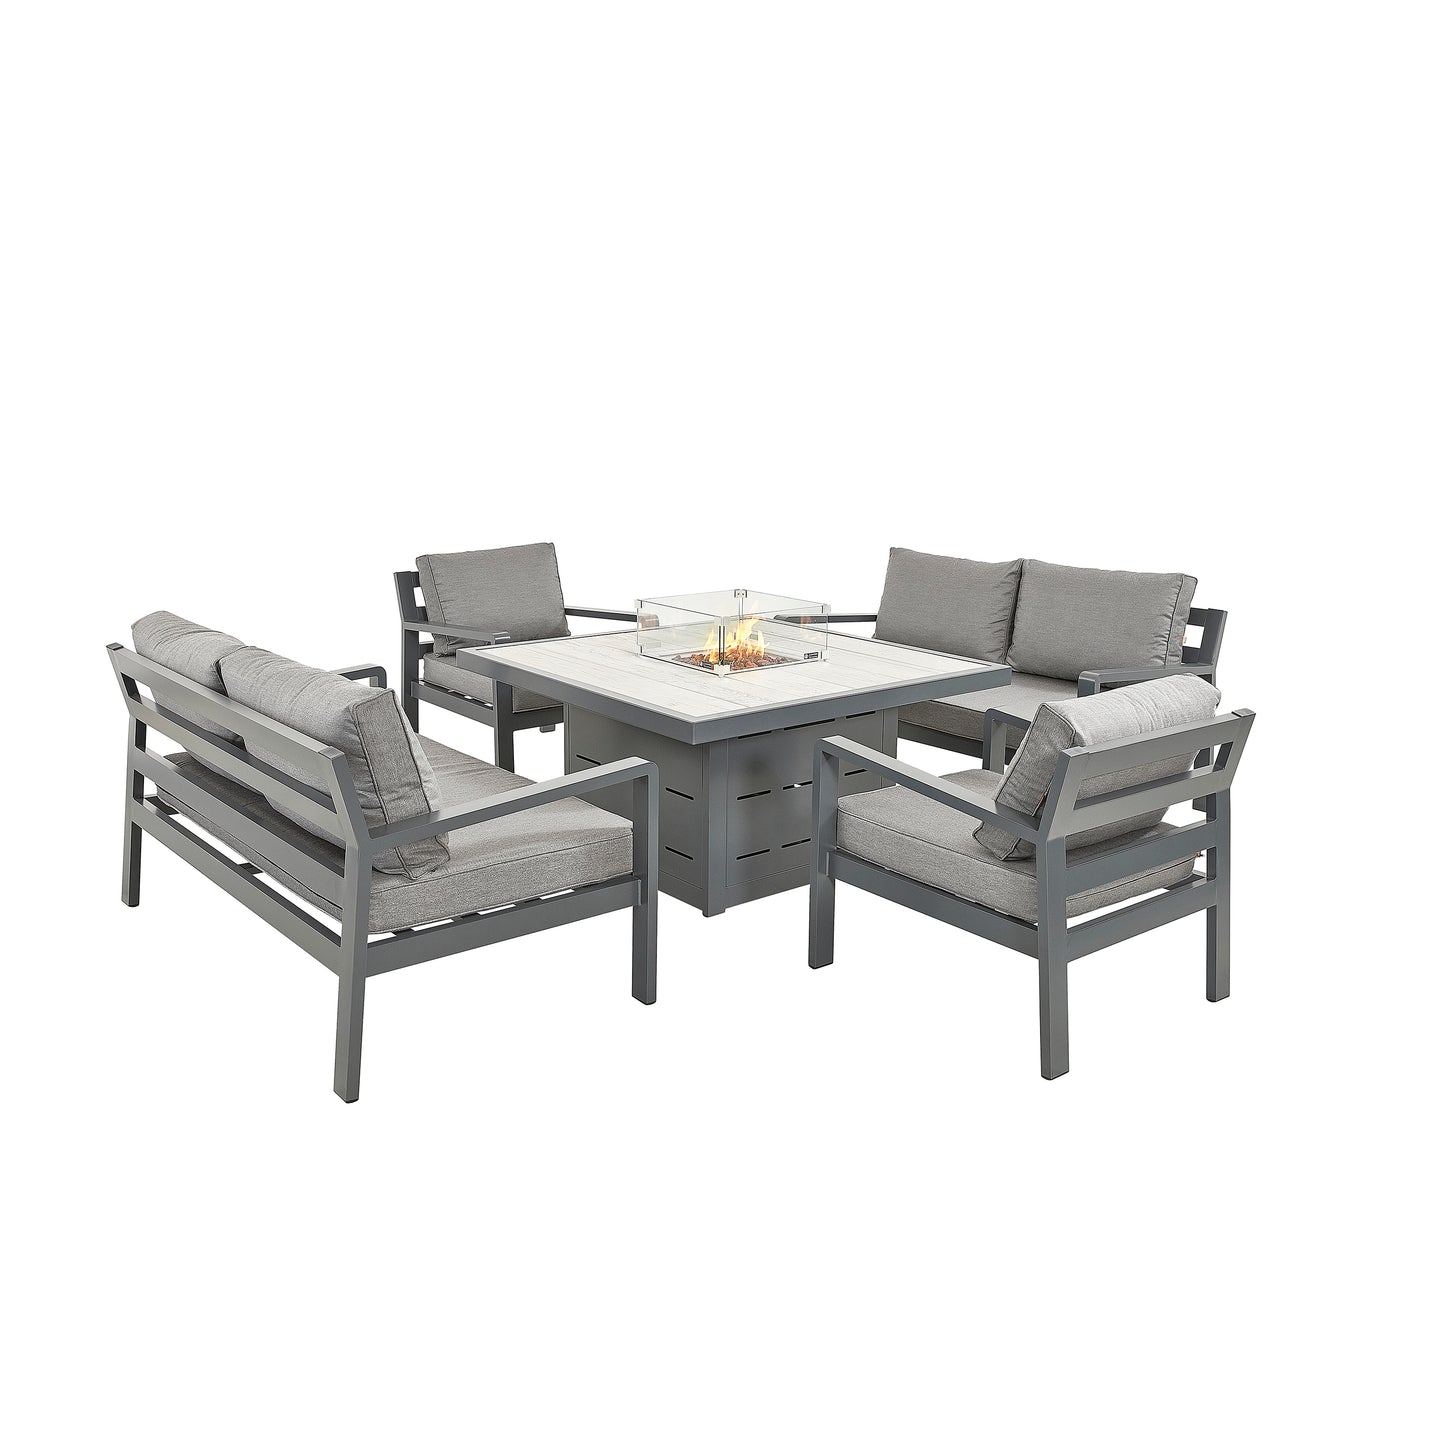 HEX Living - Tutbury Fire Pit Table Set with Two Sofas and Two Chairs